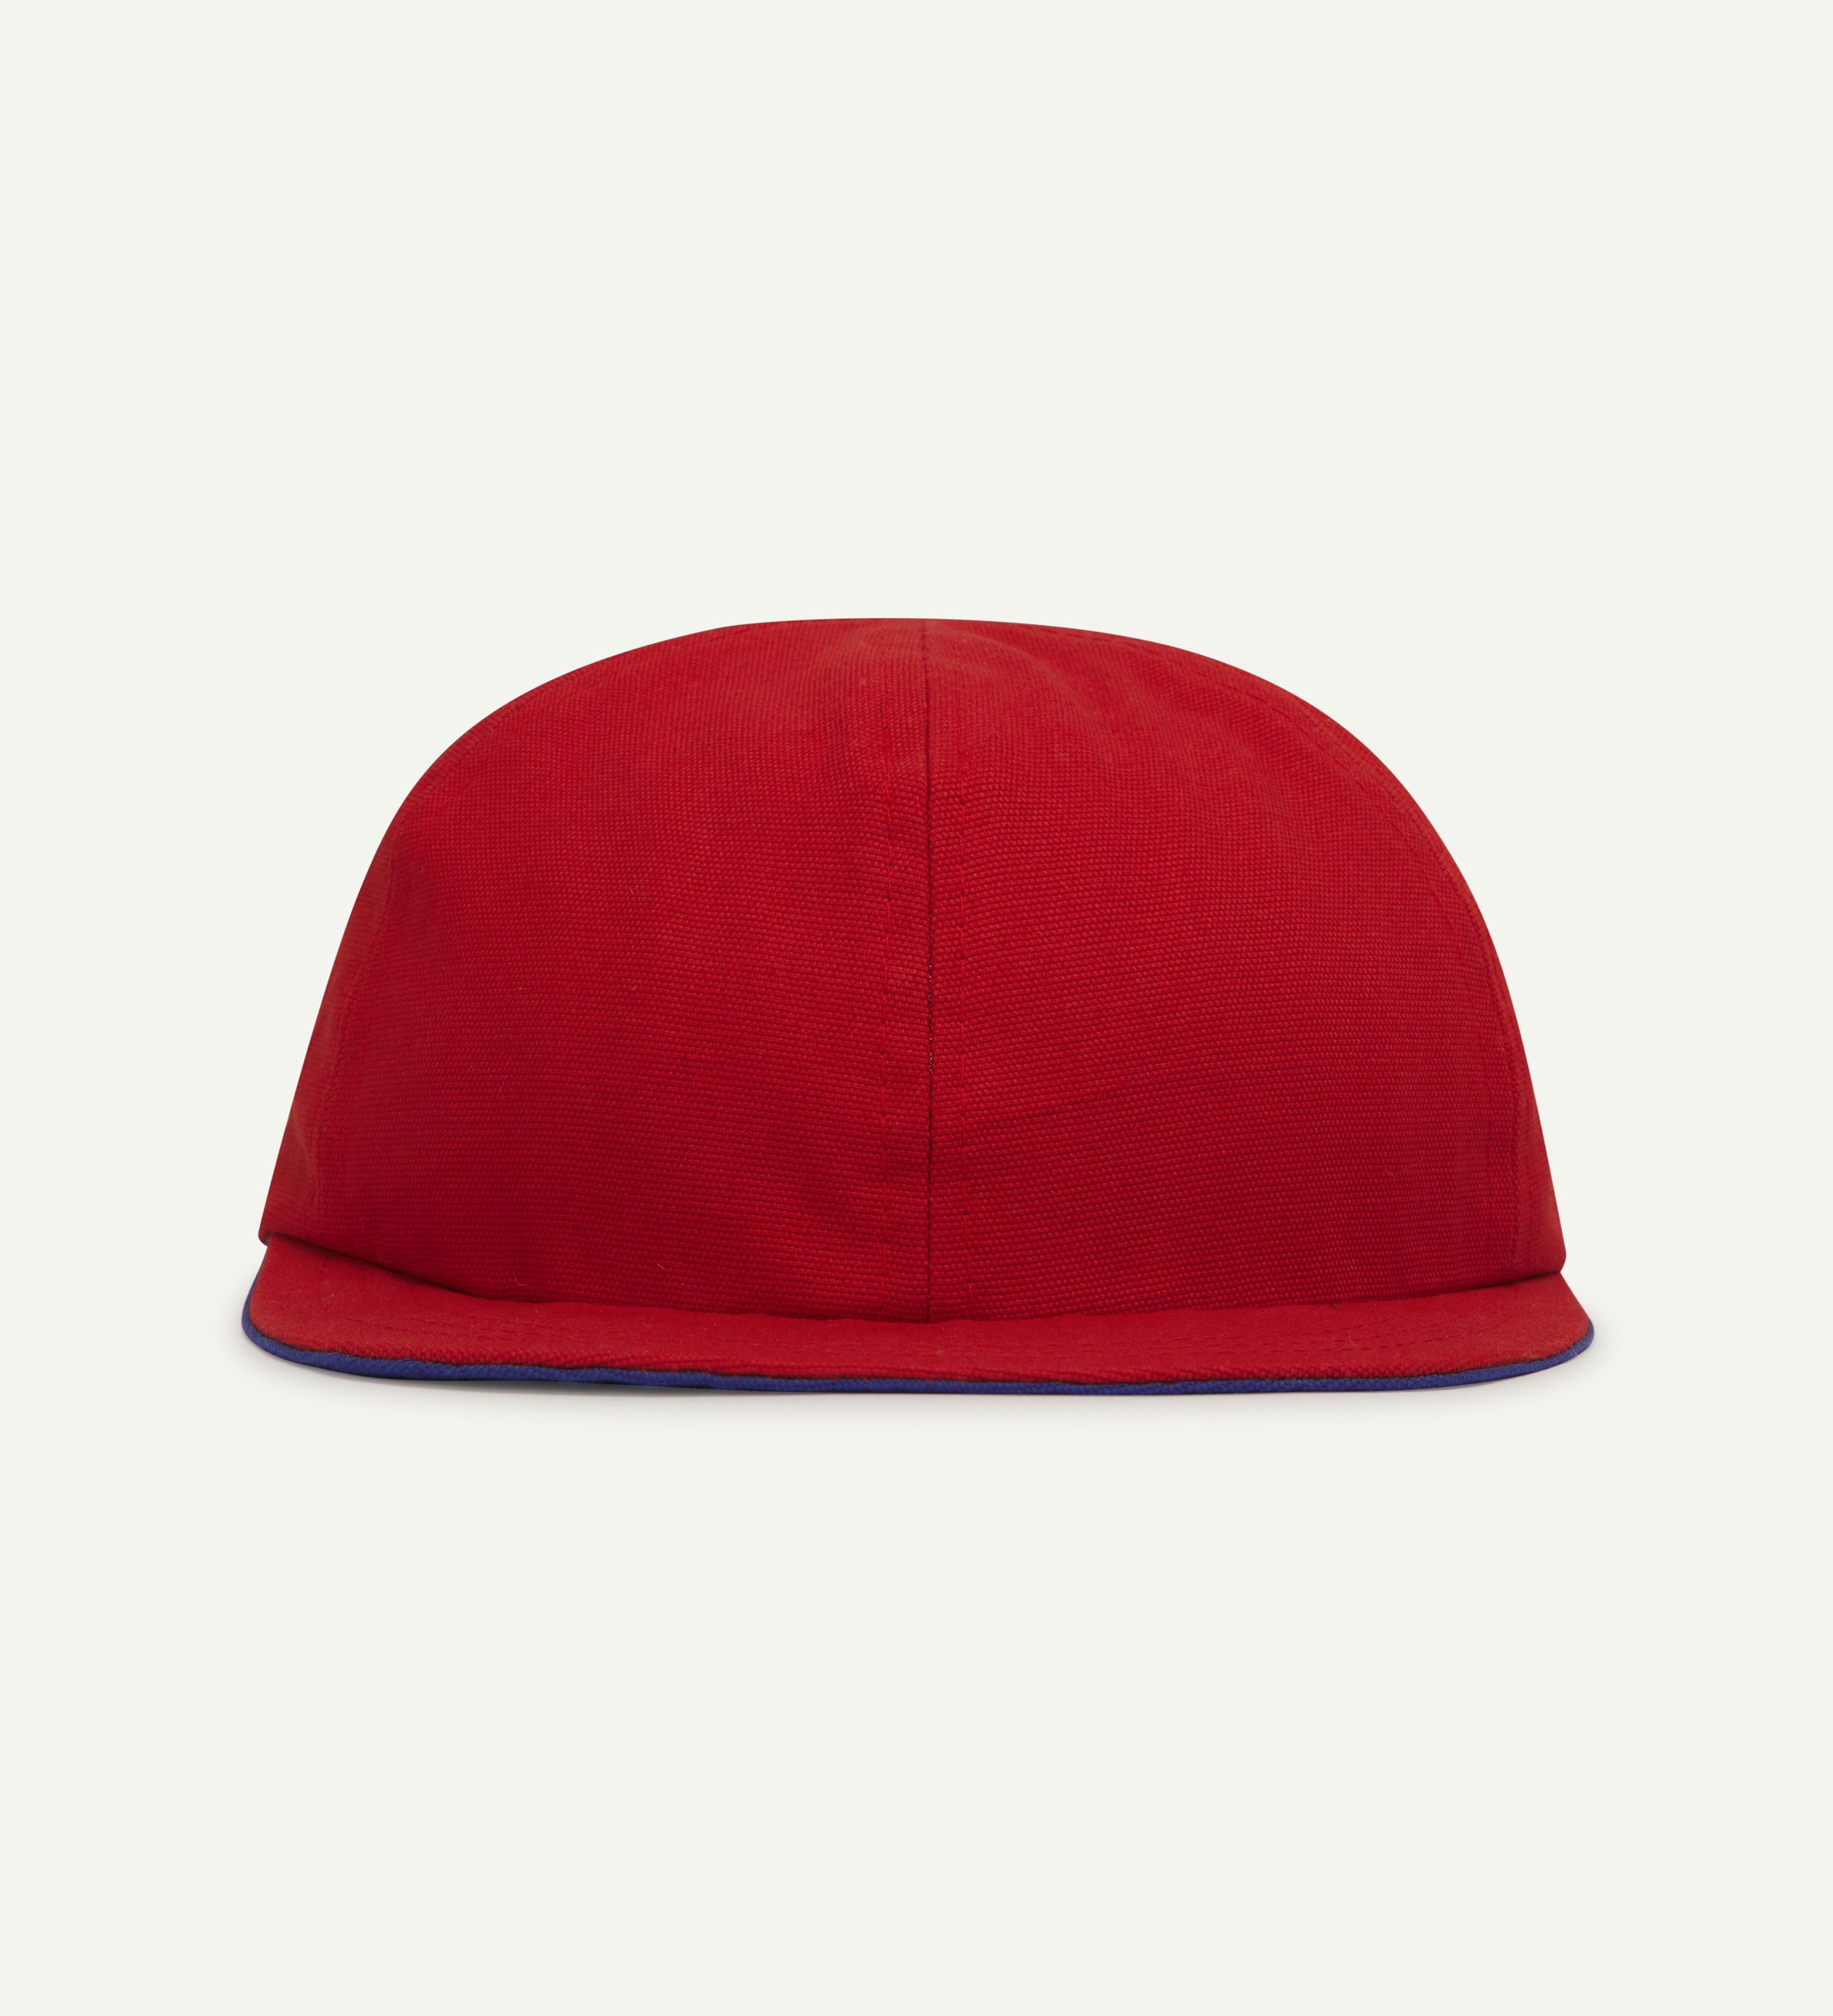 Front view of Uskees deadstock 6-panel cap in bright red showing front peak.